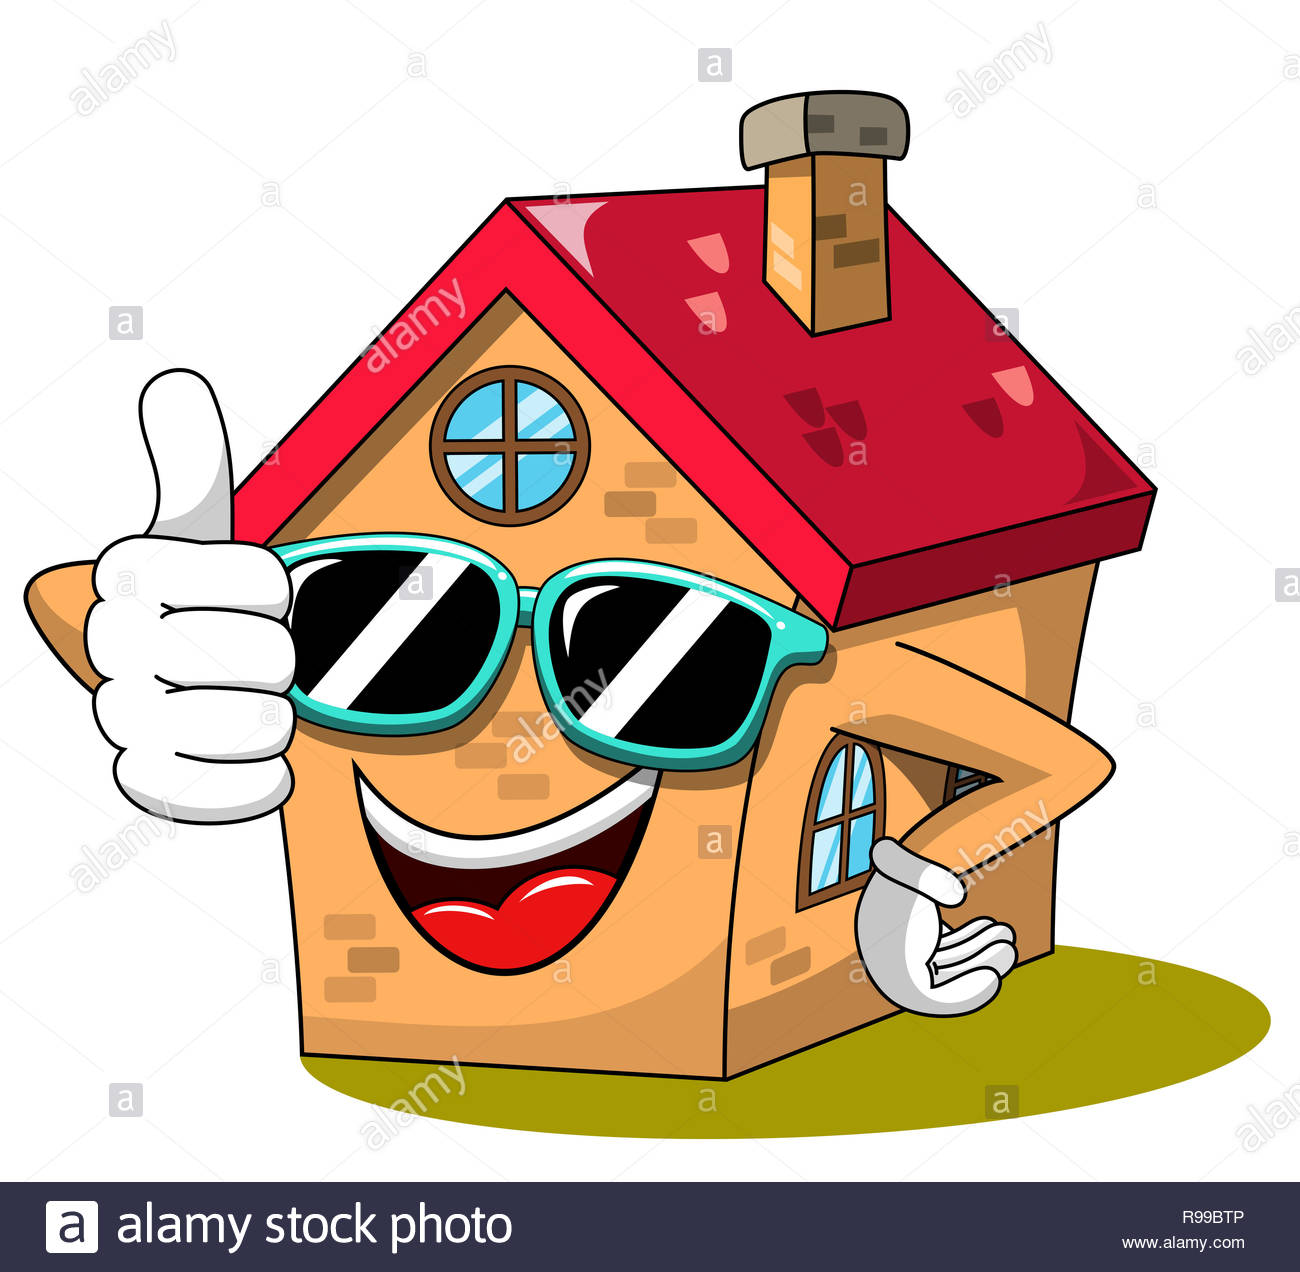 happy-house-cartoon-funny-character-thumb-up-cool-sunglasses-isolated-on-white-R99BTP.jpg